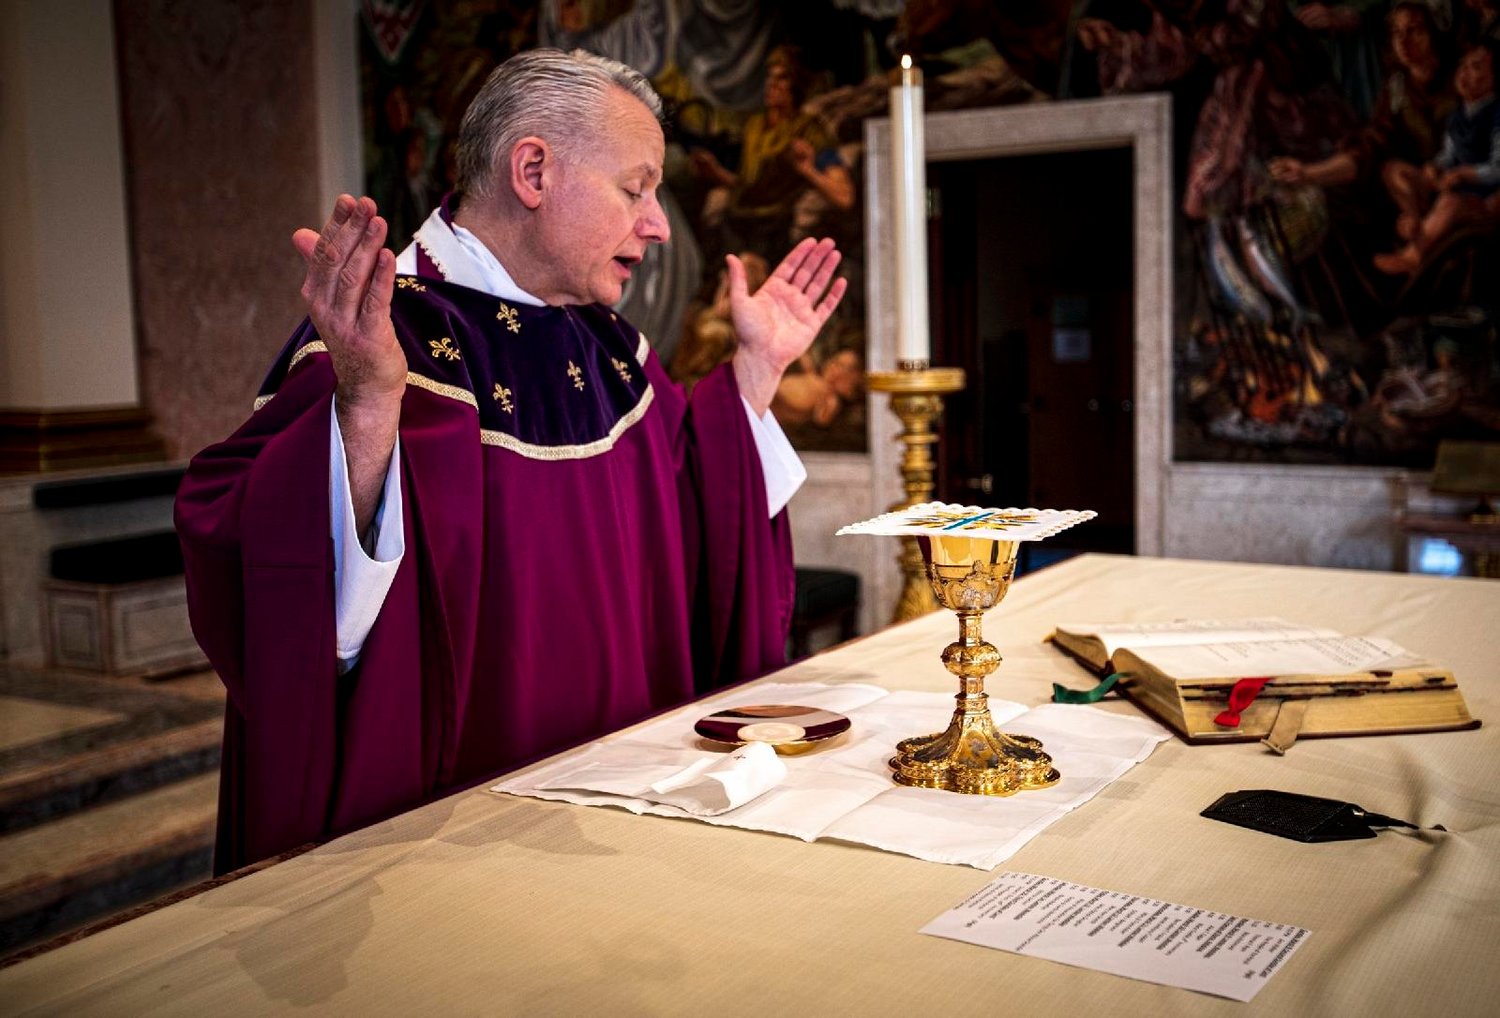 Father John C. Maria prays over the Eucharist at the altar of the Cathedral of St. Catharine of Siena in Allentown, Pa., March 9, 2020. According to Catholic teaching, the bread and wine, upon consecration, become the body and blood of Christ.